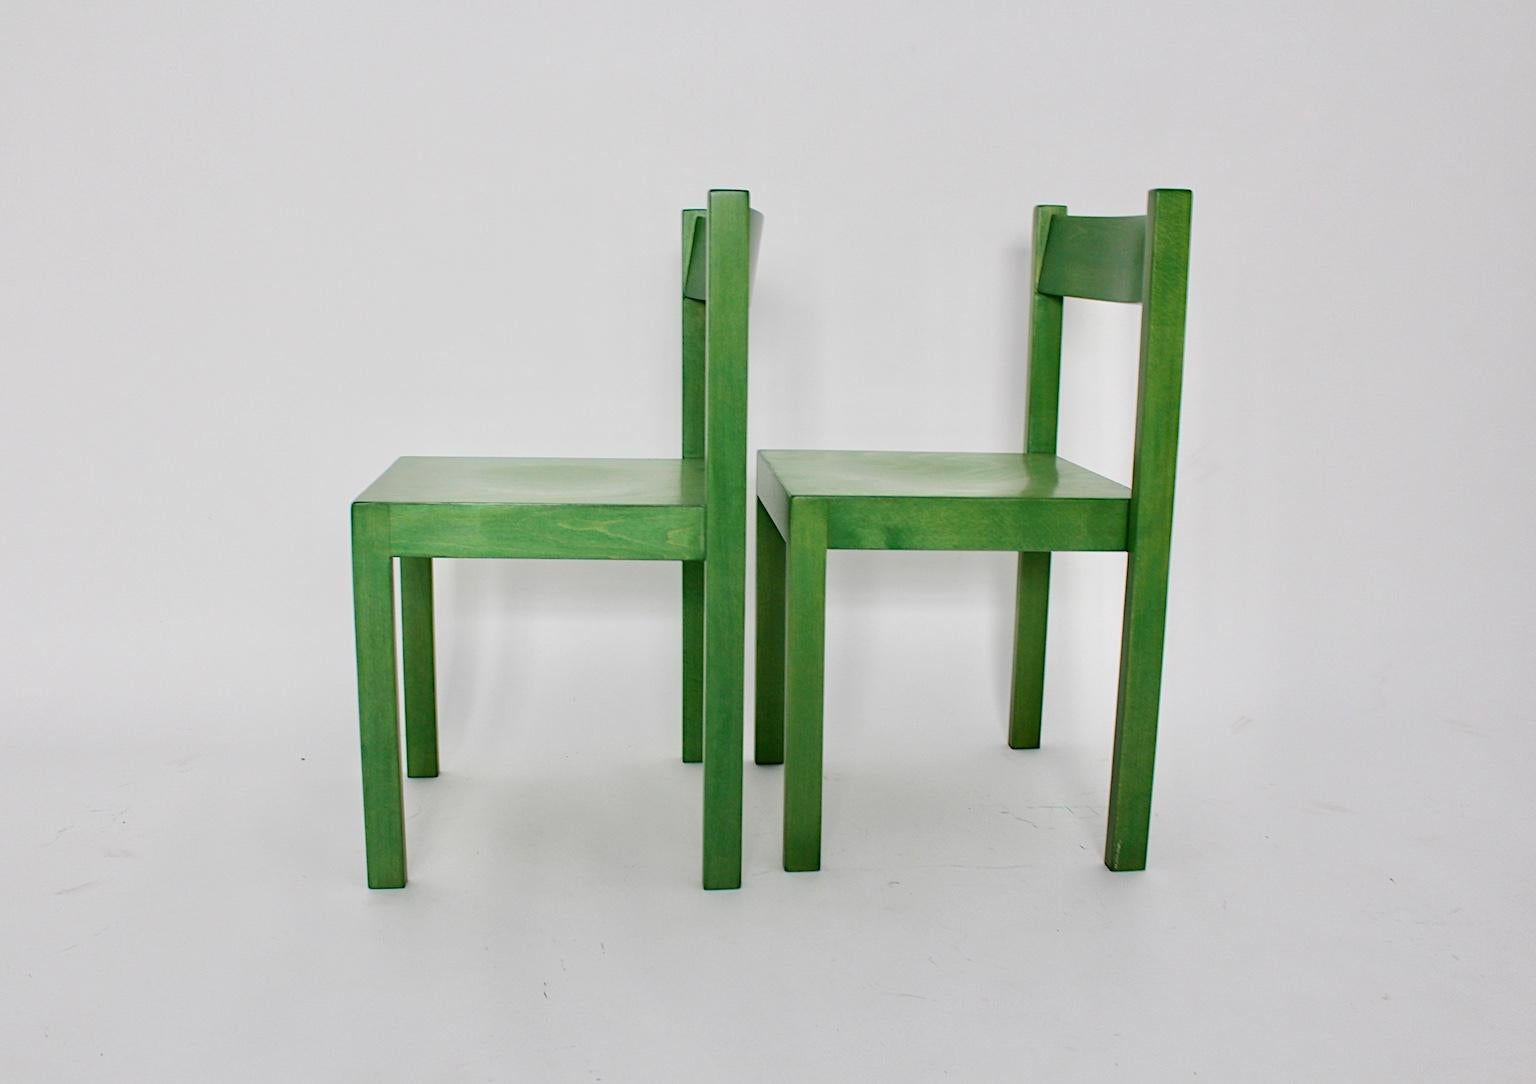 20th Century Mid-Century Modern Green Vintage Dining Chairs by Carl Auböck 1956 Vienna For Sale